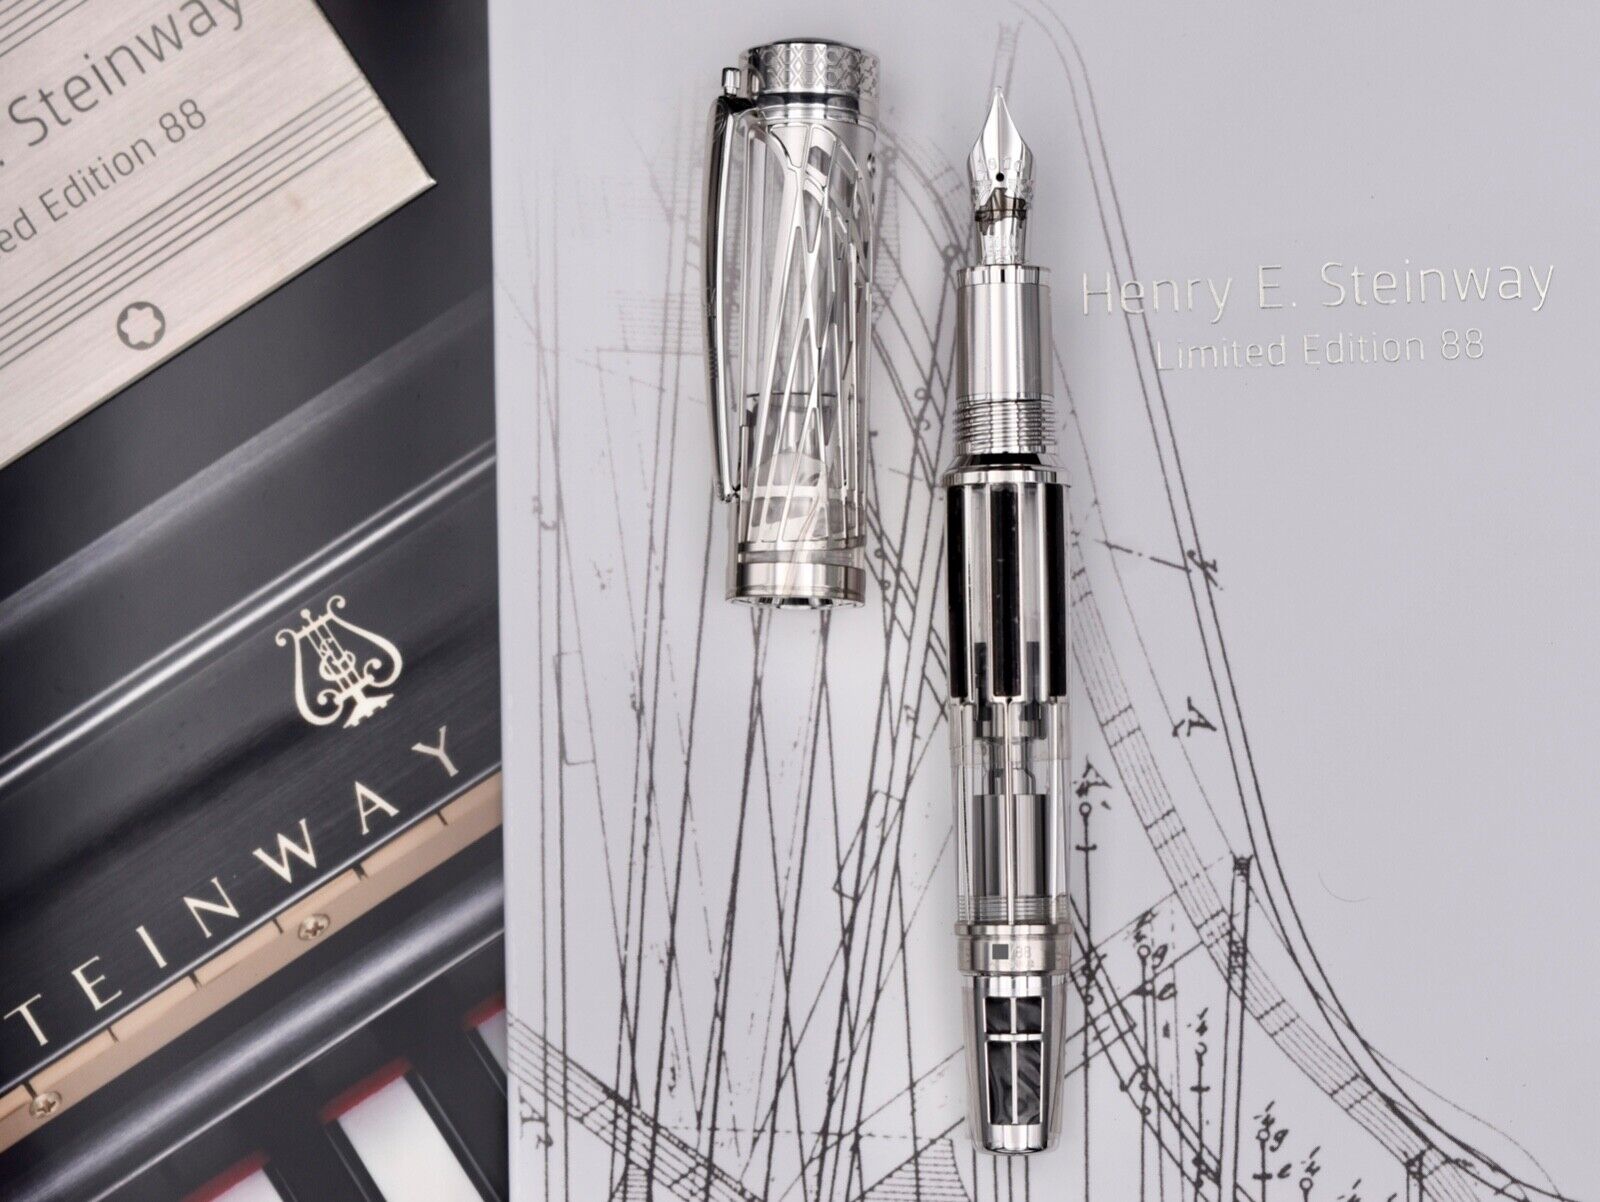 MONTBLANC 2014 Patron of Art Henry E. Steinway Artisan Limited Edition 88 111836